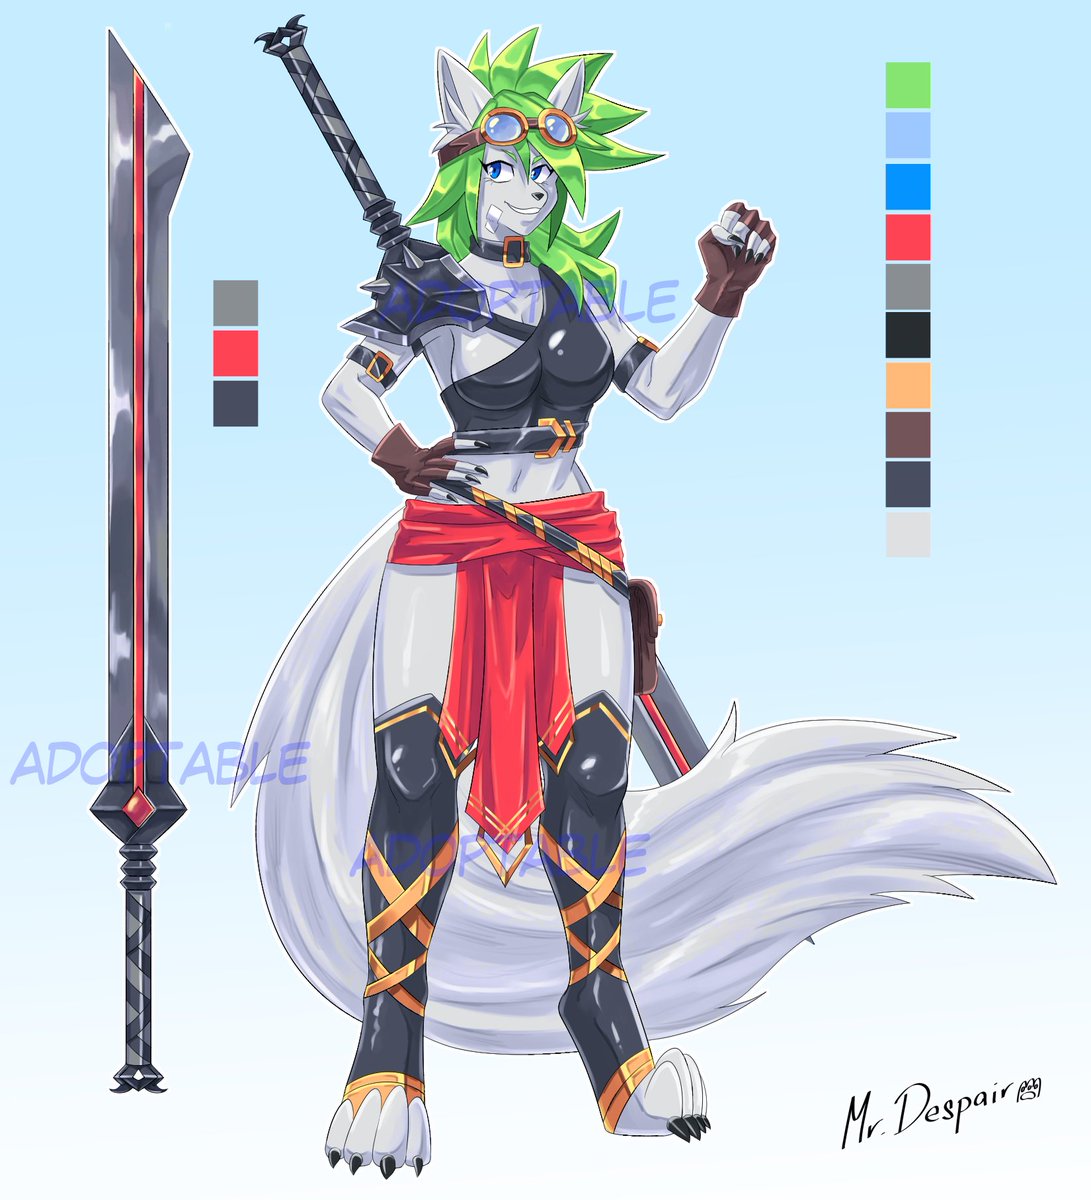 SWORDWOMAN ADOPT
Link in comments

#adopt #adopts #adoptable #auction #openauction #openadoptable #originalcharacter #adoptableauction #ocadoptable #cute #anthro #adoptables #wolf #fox #female #forsale #paypal #oc #wolfadoptable #furry #characterforsale #fantasy #warrior #sword